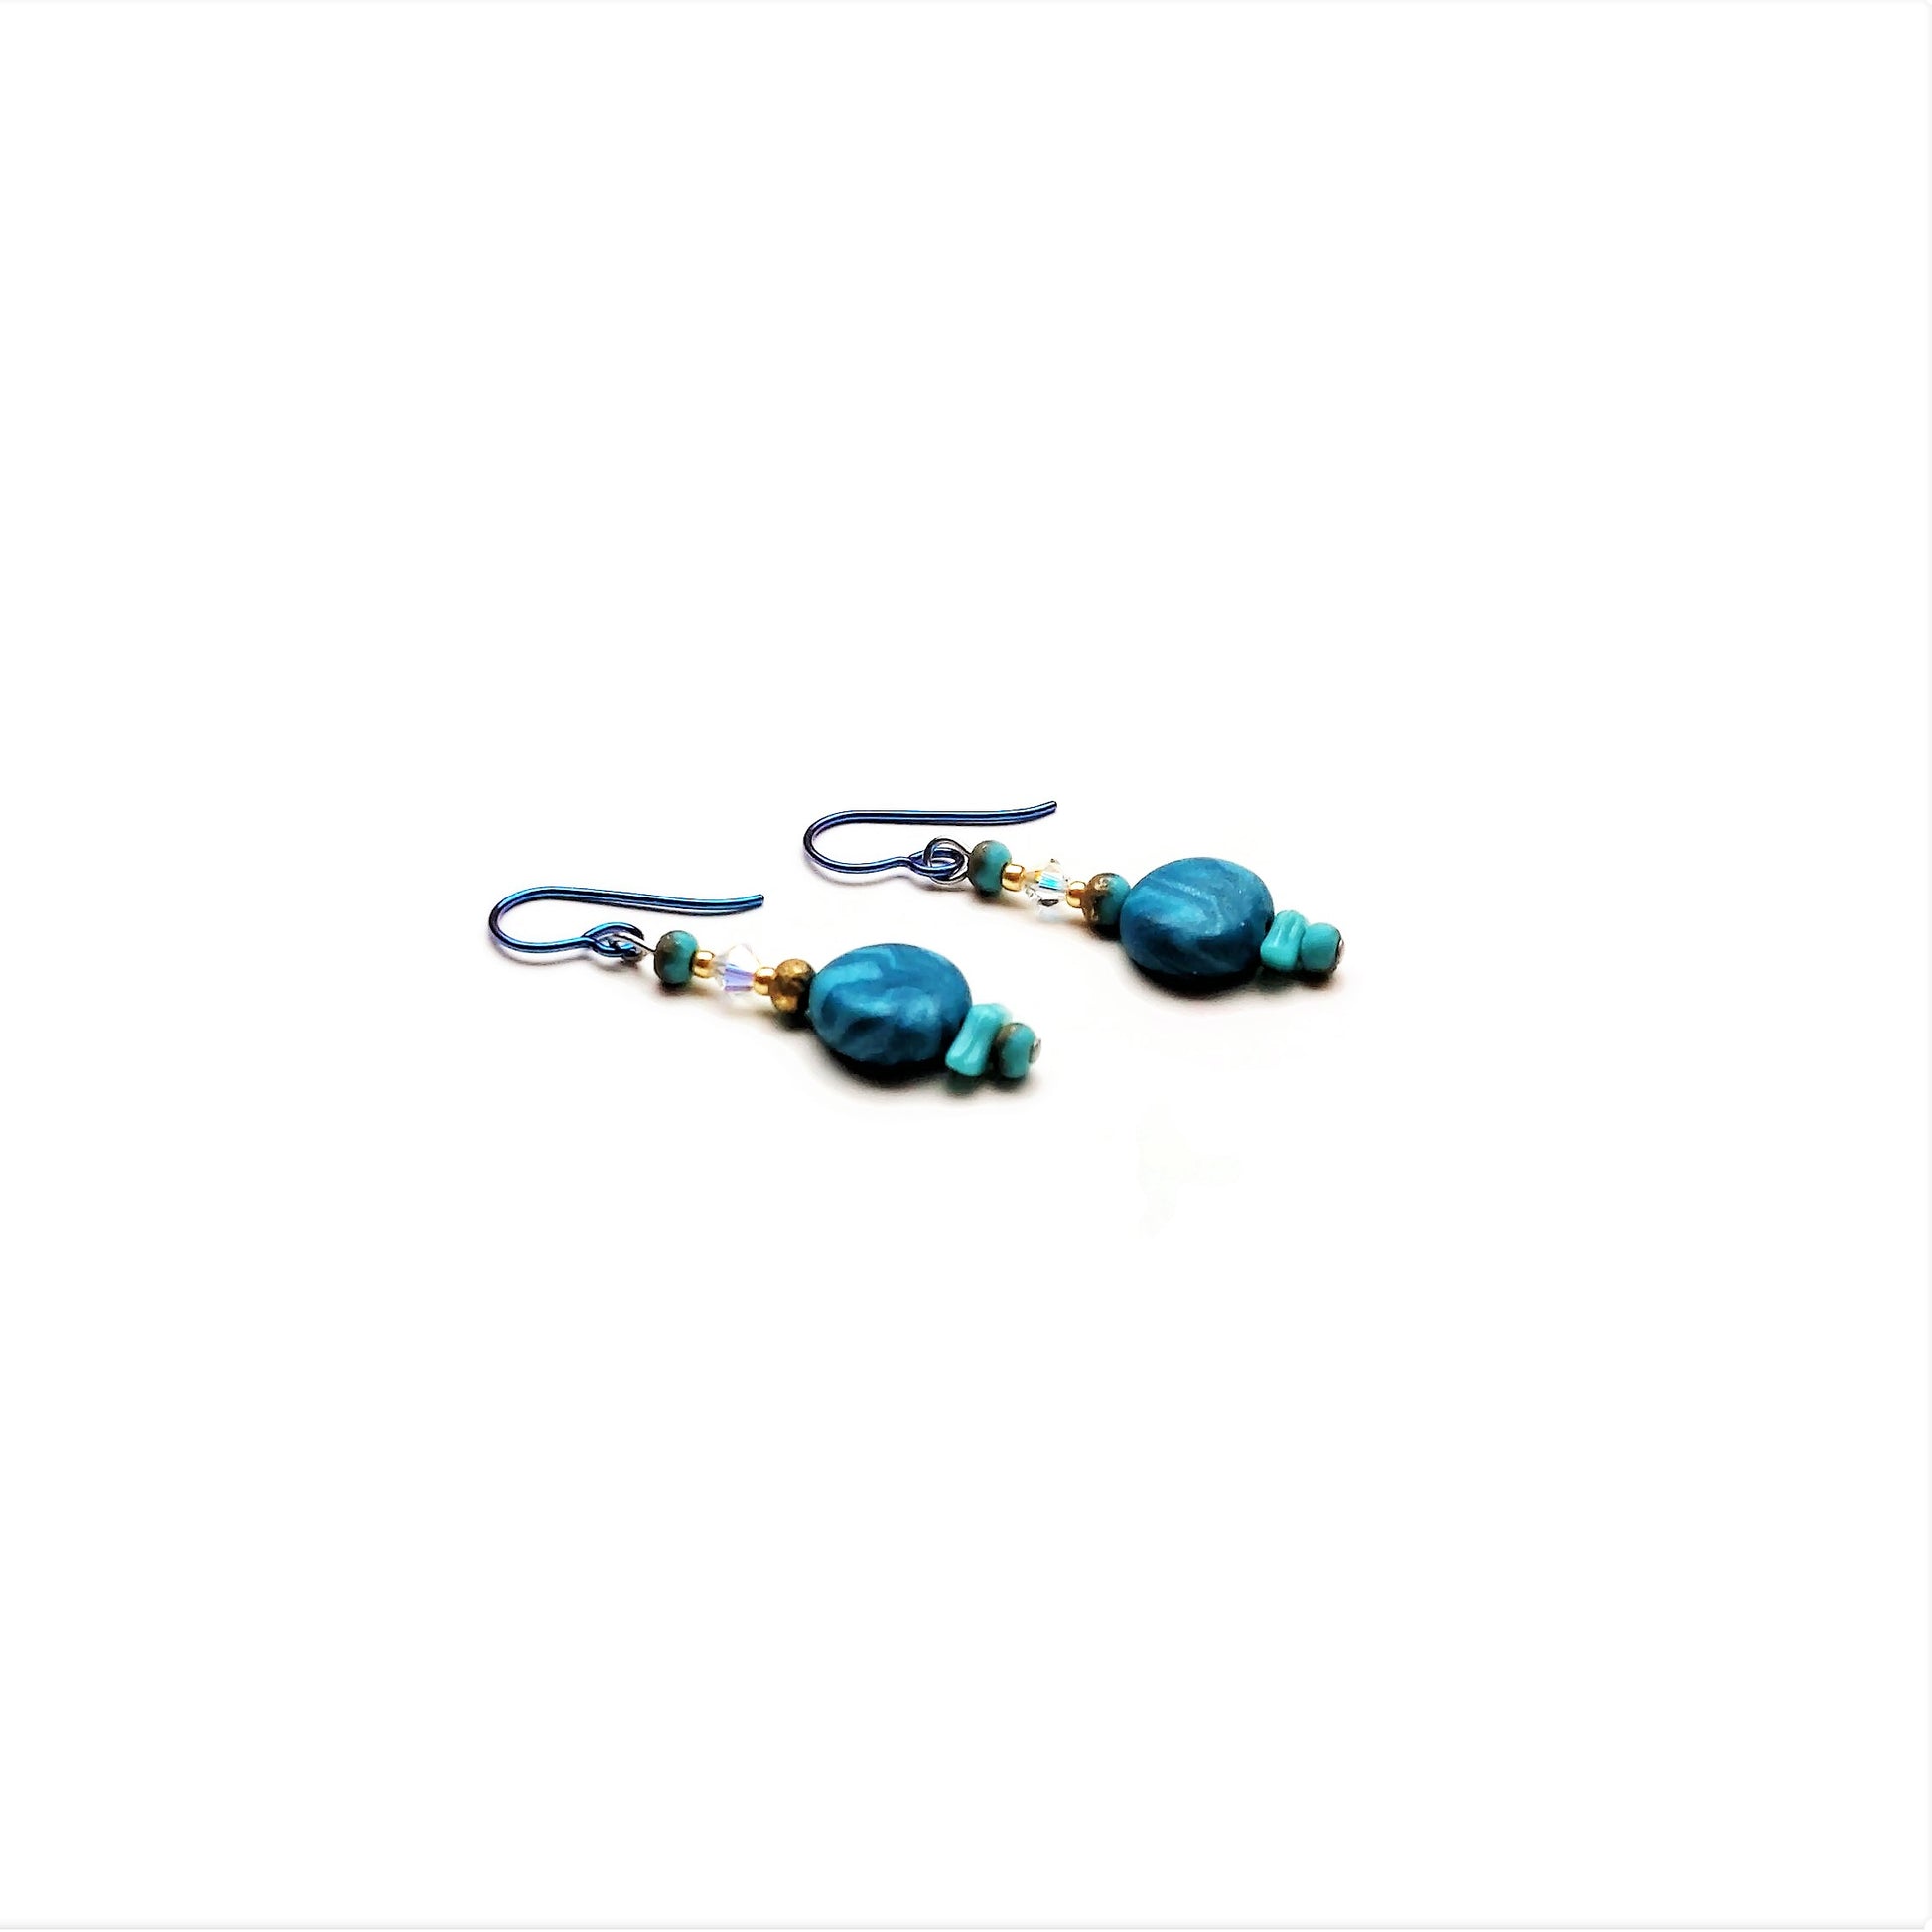 Polymer clay disk bead drop earrings with teal niobium ear wires on white background